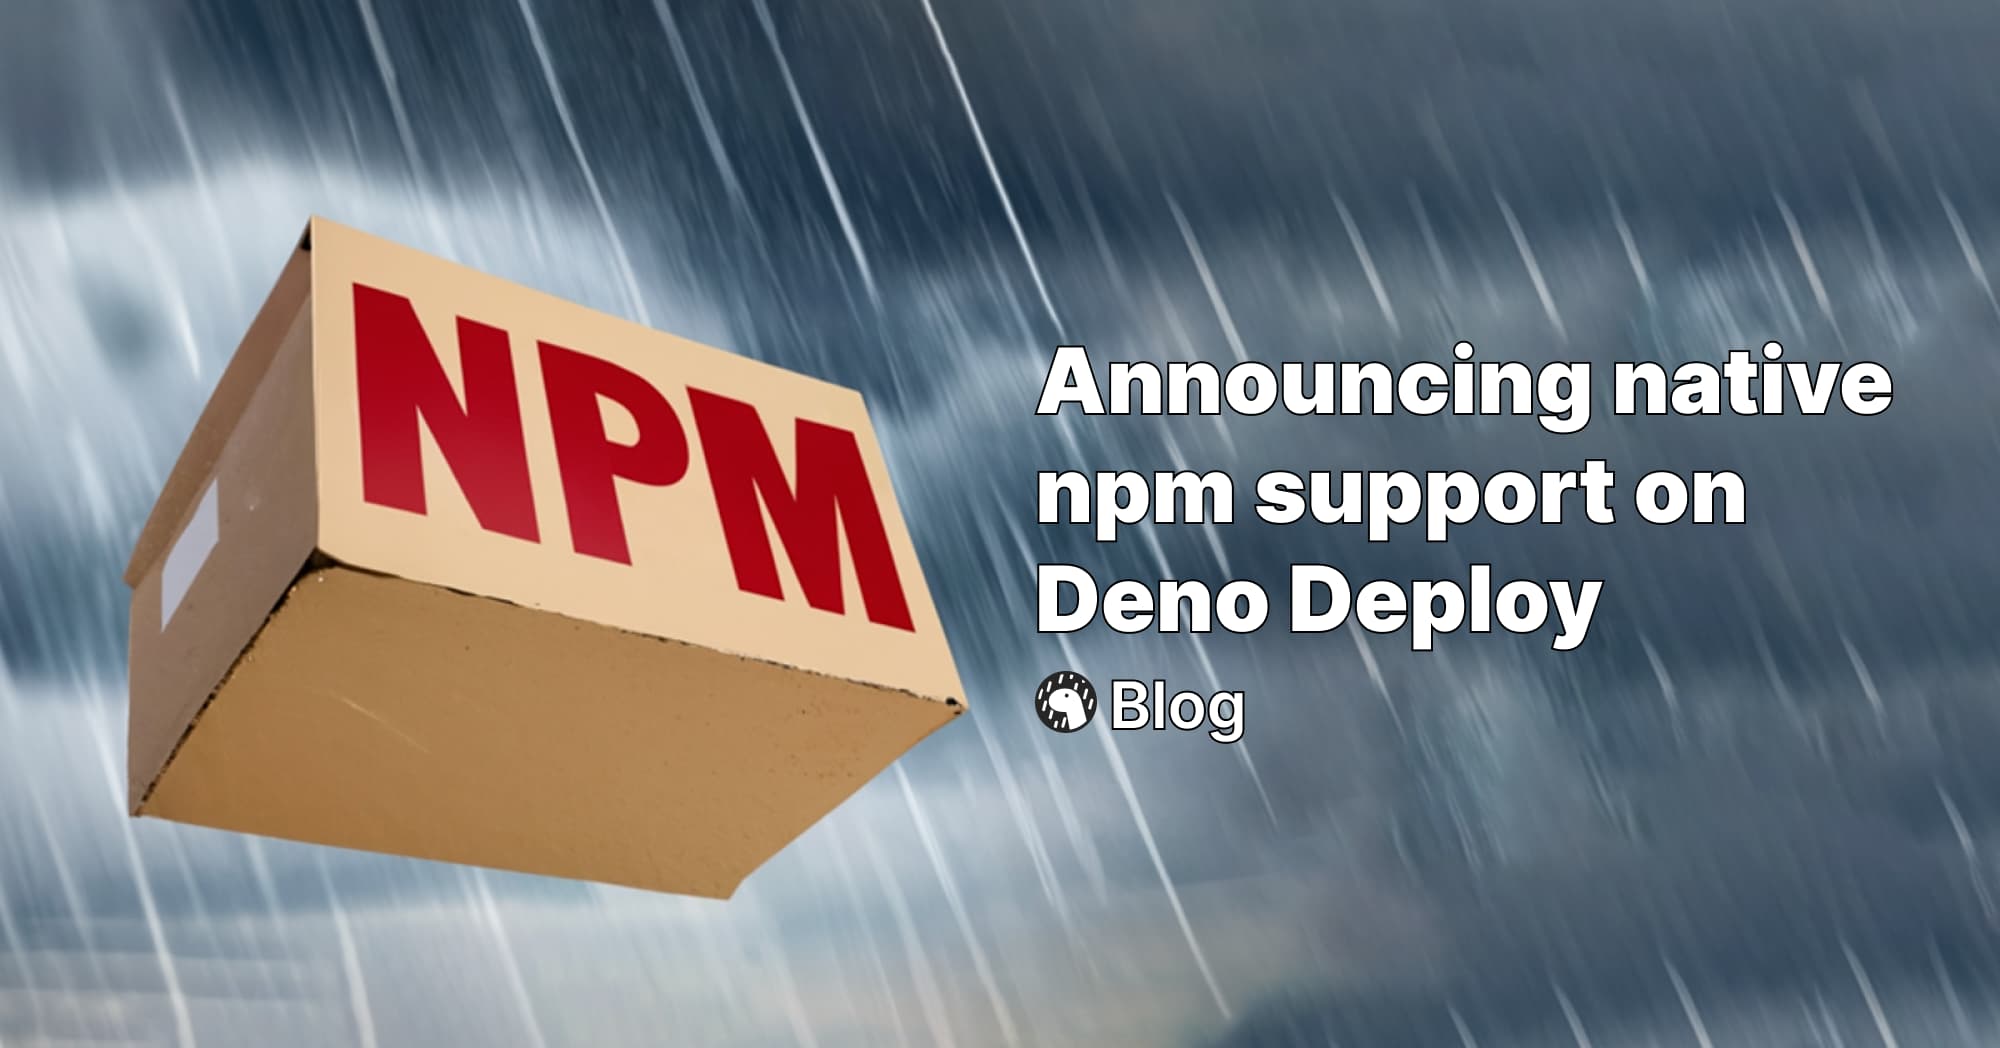 Announcing native npm support on Deno Deploy